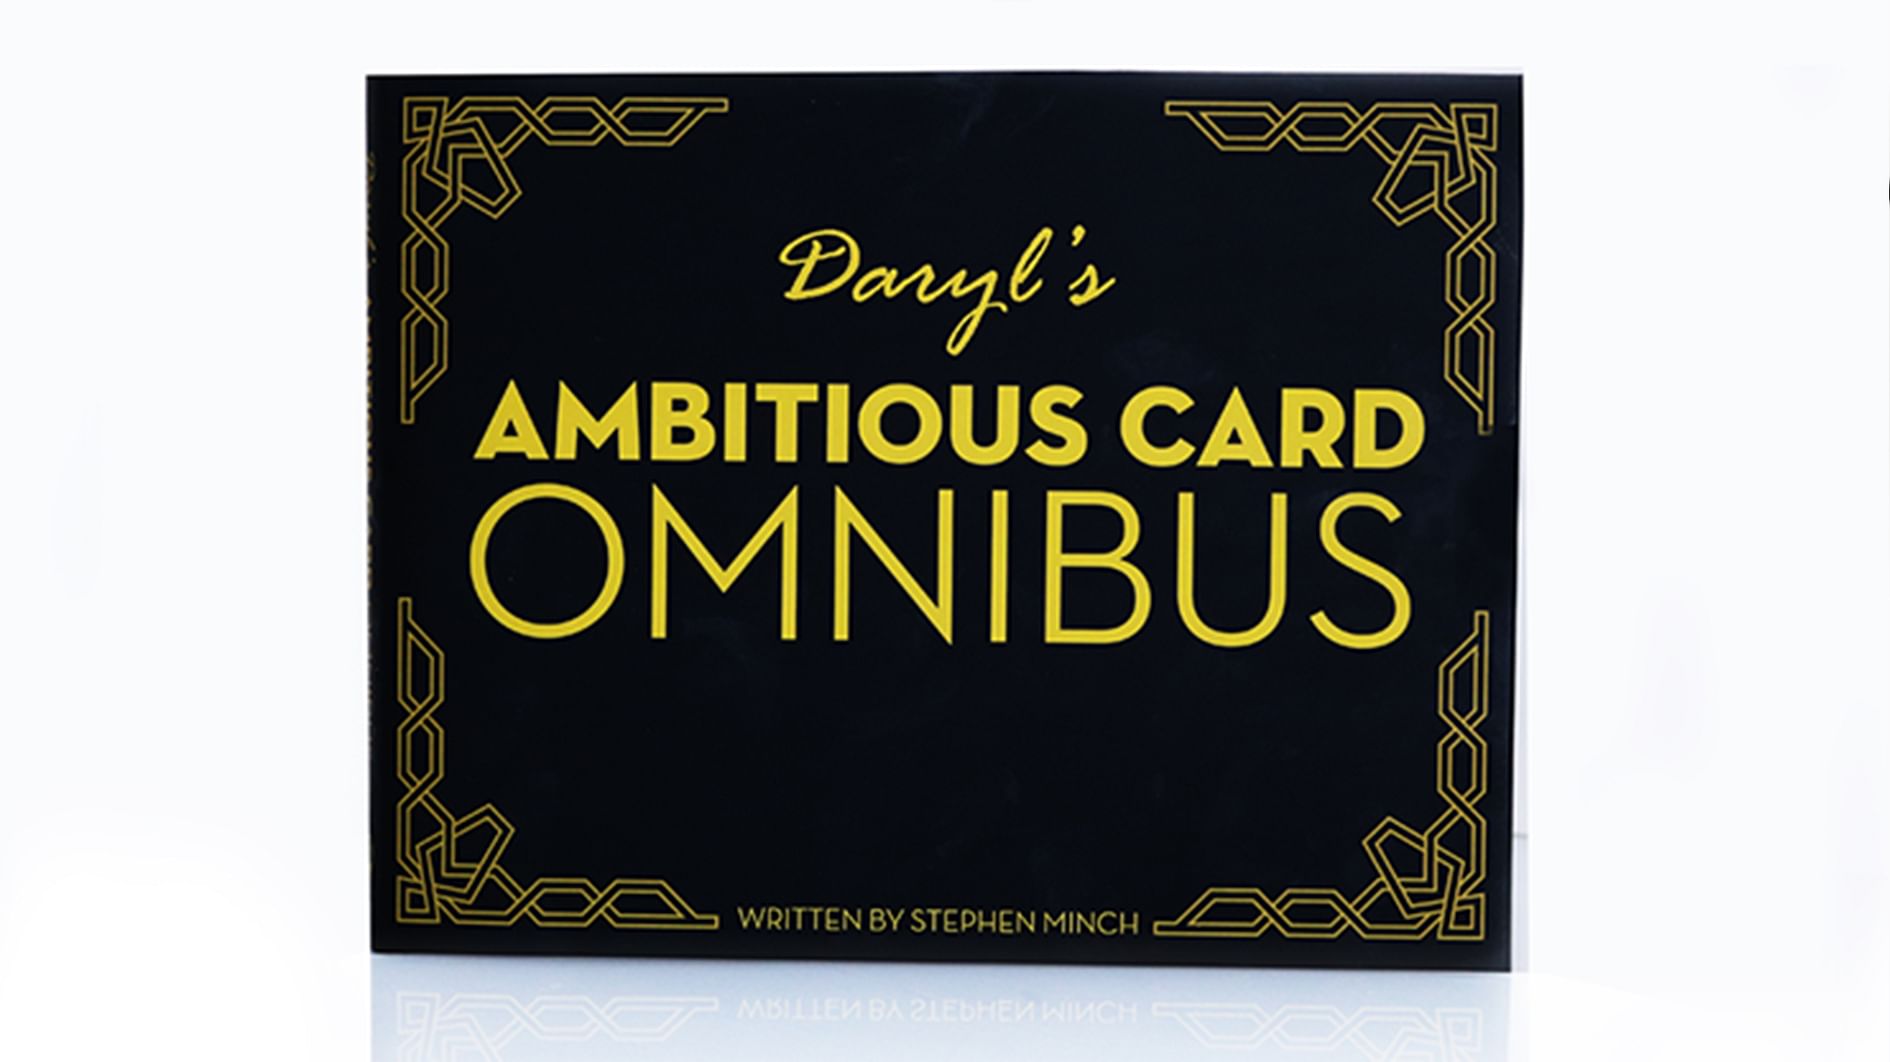 Ambitious Card OMNIBUS by DARYL (PDF Download)